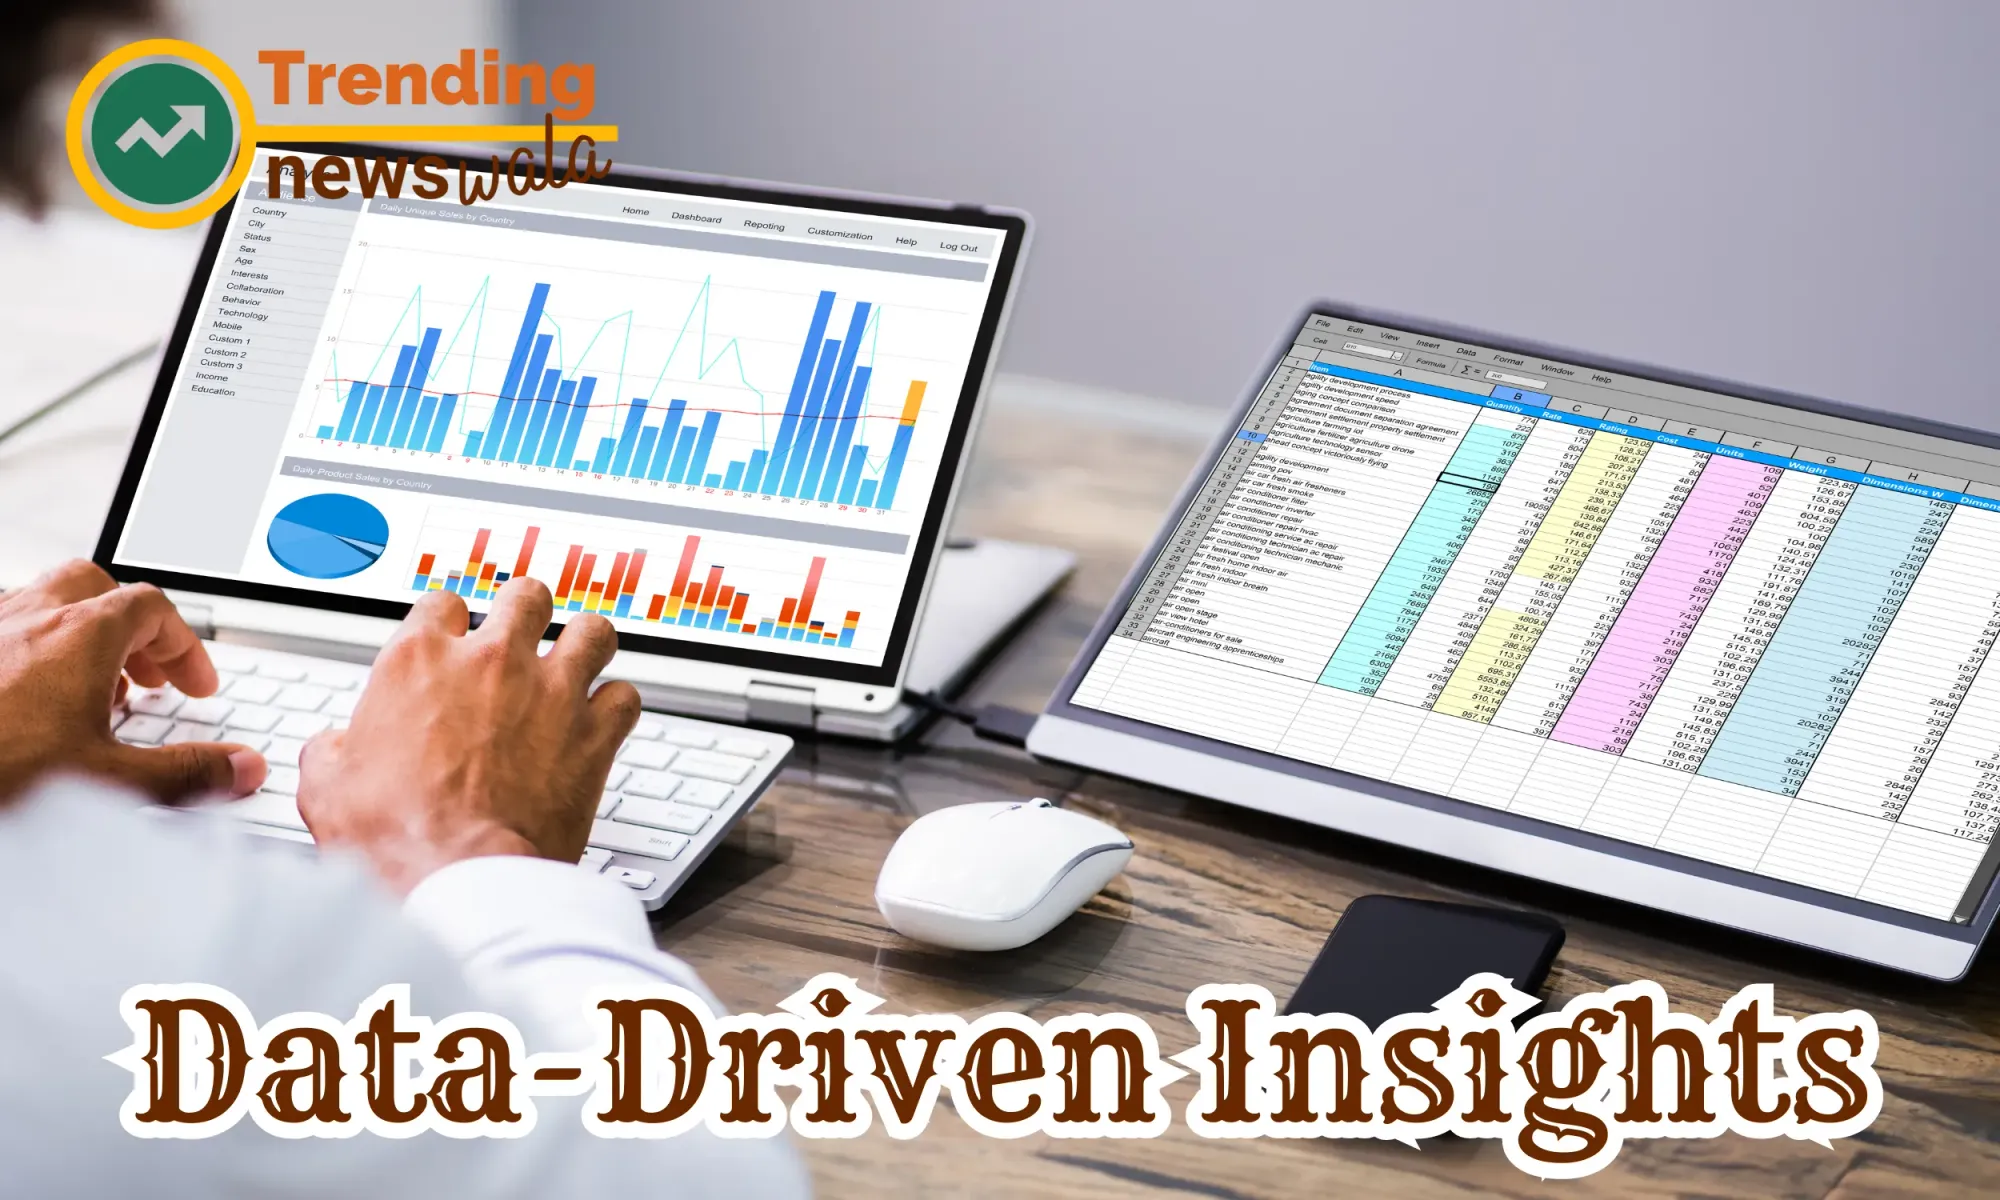 Data-driven insights in digital marketing refer to the practice of using data